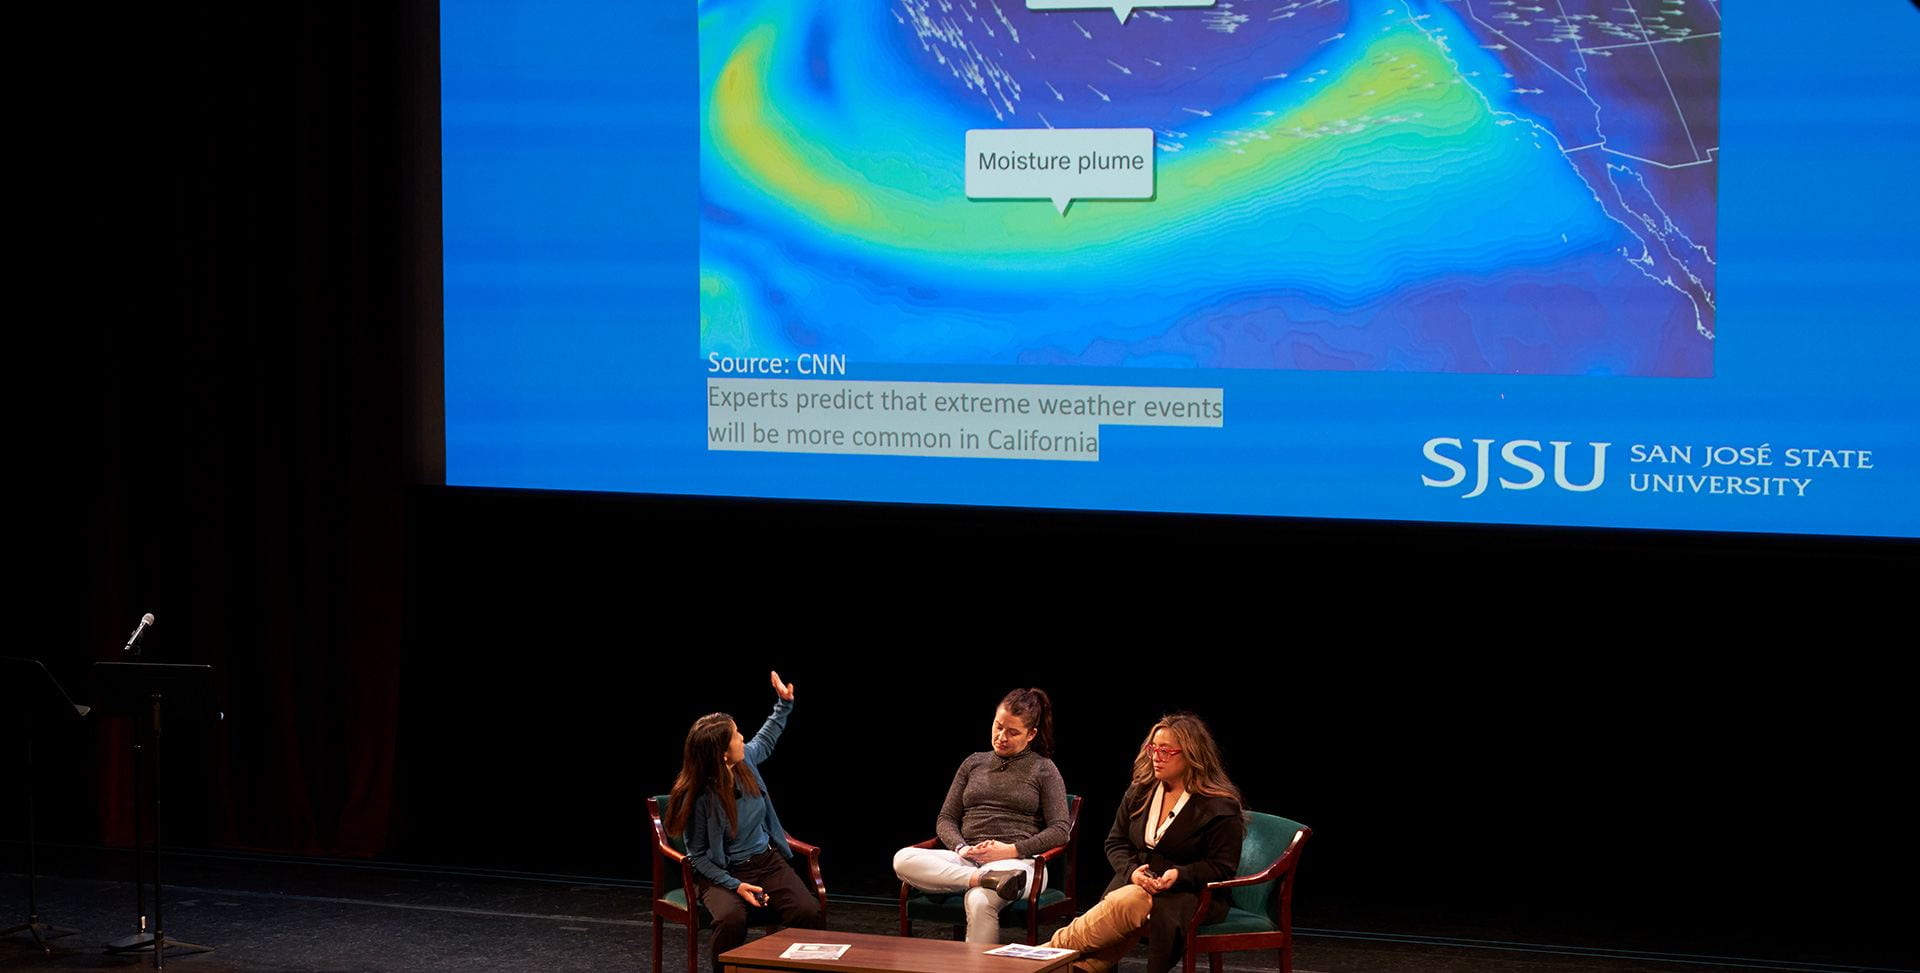 3 people on a stage seated with image of water behind them